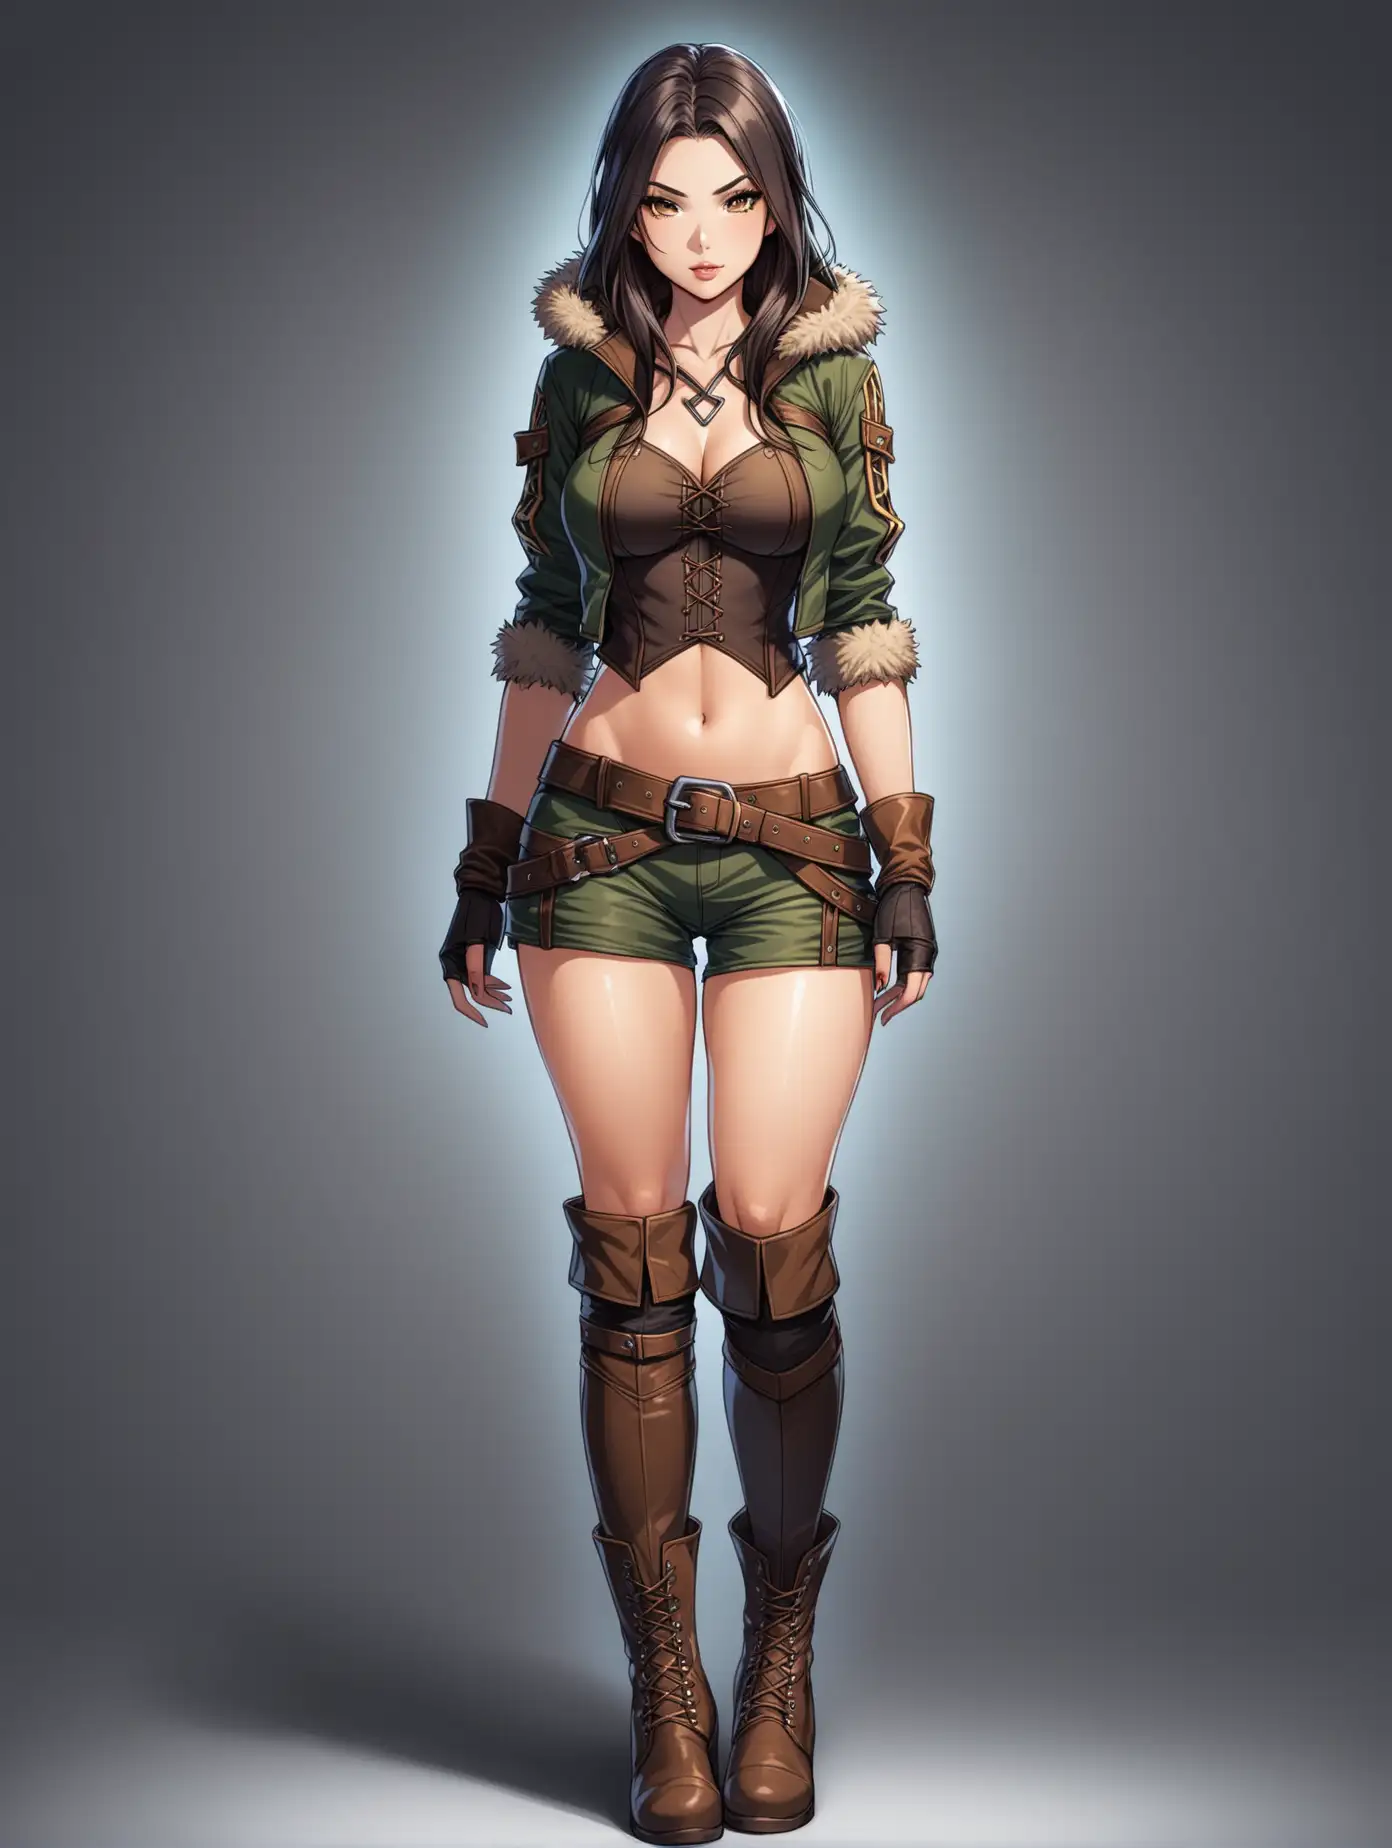 Full body image of a hot huntress girl wearing ankle high boots